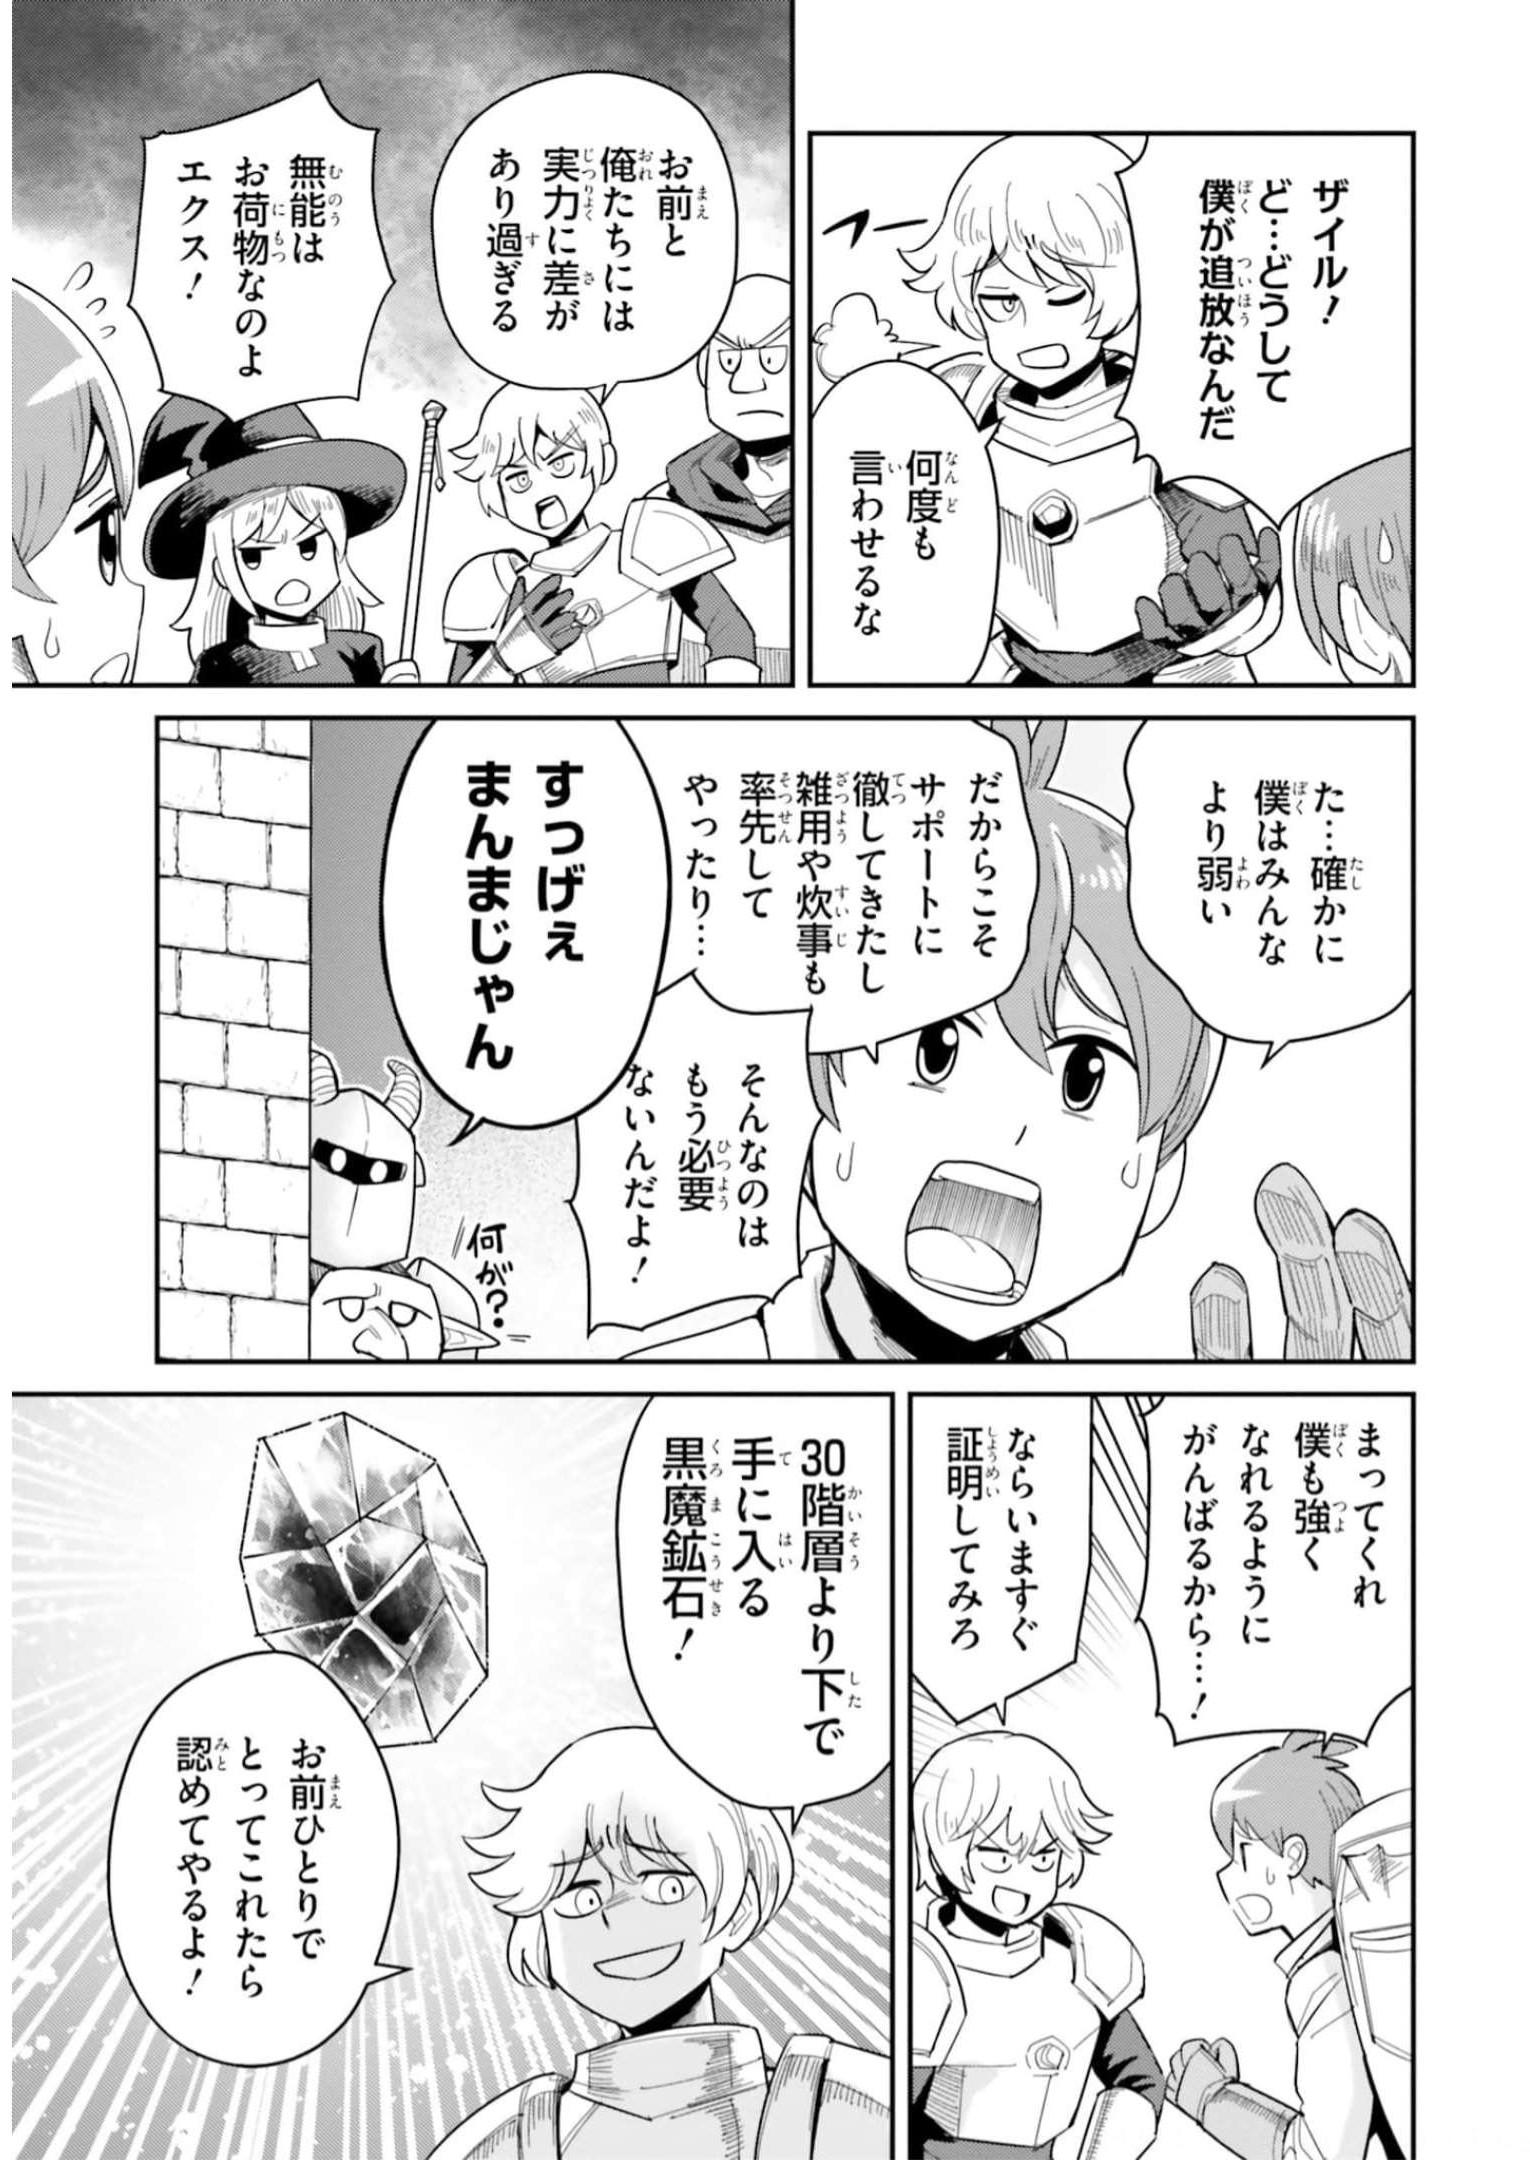 Dungeon Friends Forever Dungeon's Childhood Friend ダンジョンの幼なじみ 第25話 - Page 5